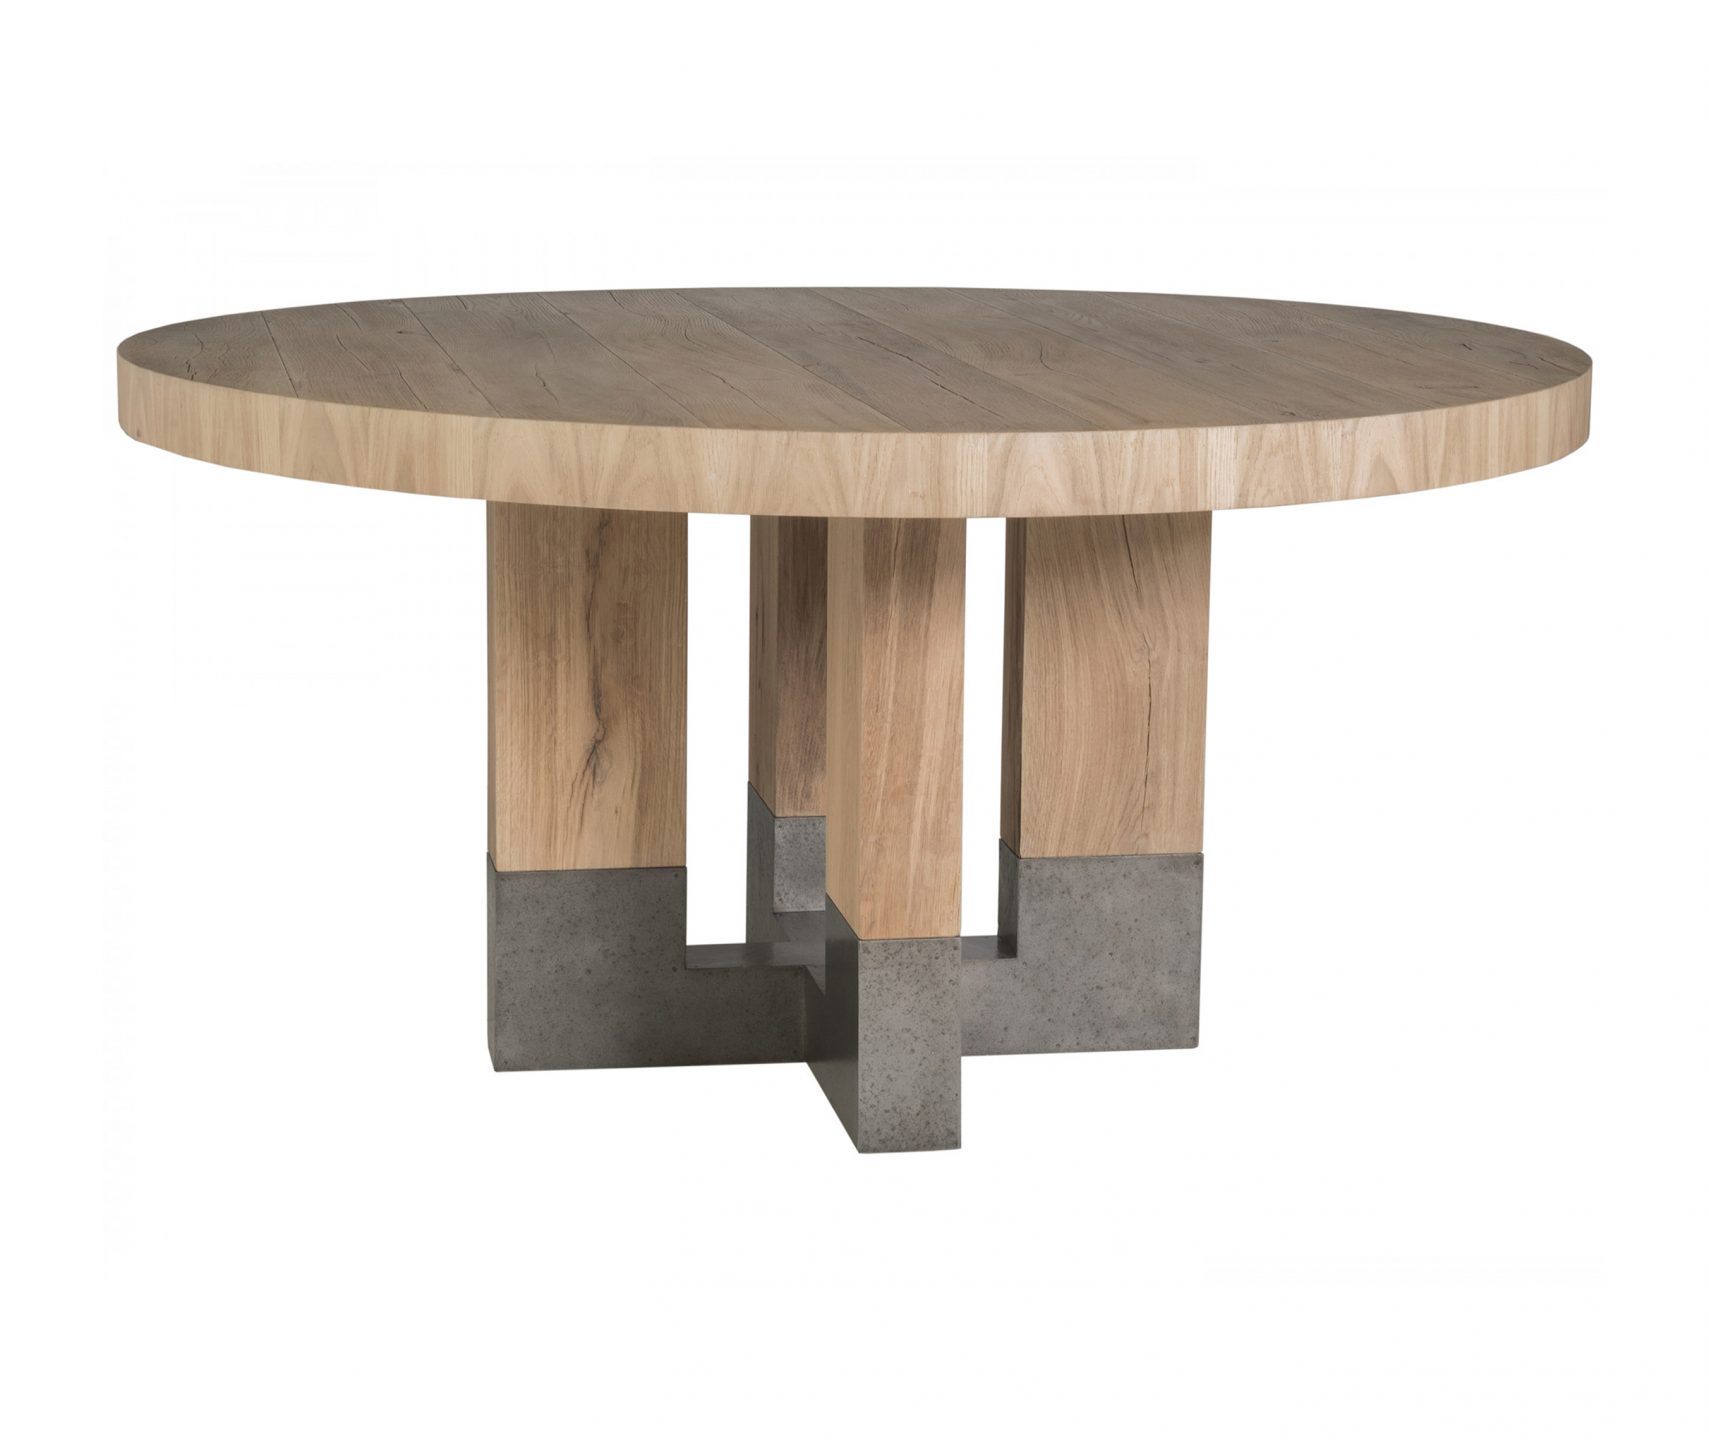 Lexington Home Brands_Verite Round Dining Table 1_int_products